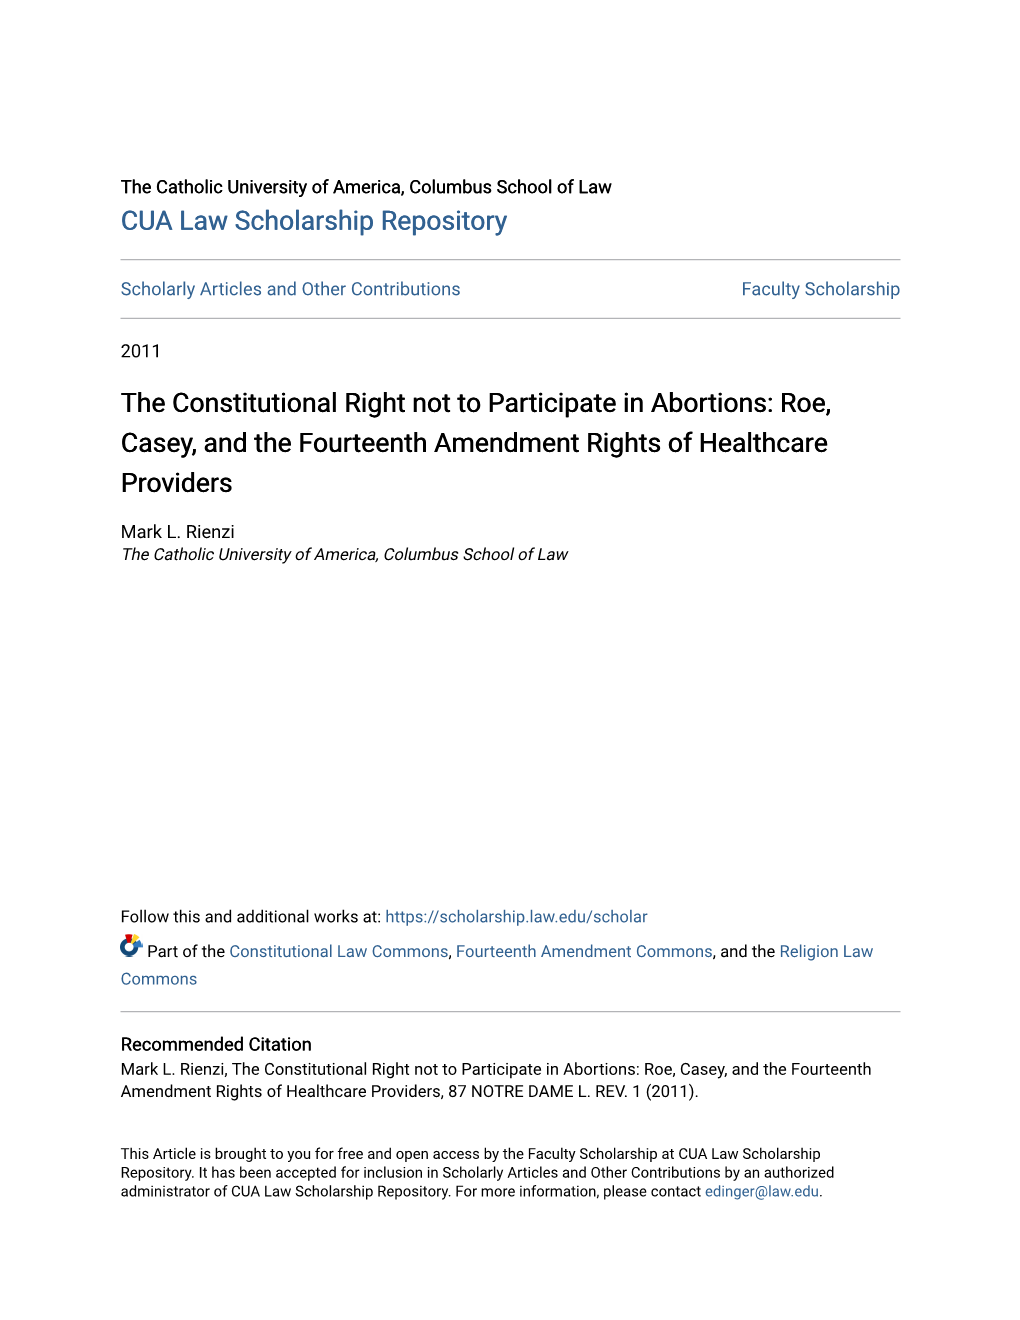 The Constitutional Right Not to Participate in Abortions: Roe, Casey, and the Fourteenth Amendment Rights of Healthcare Providers